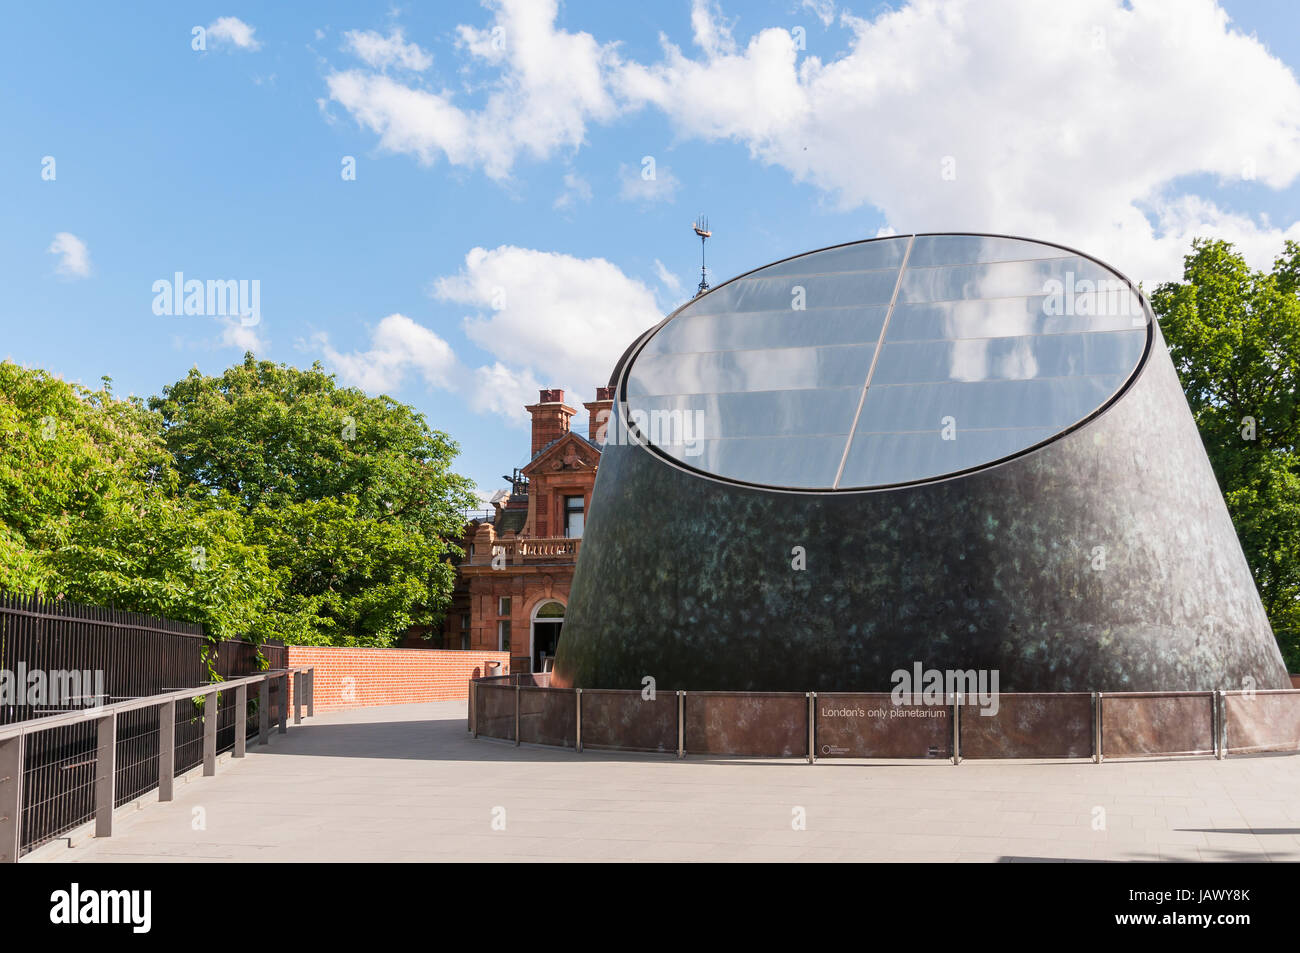 London, United Kingdom - May 9, 2011: Building of the Peter Harrison Planetarium. It is a 120-seat digital laser planetarium, situated in Greenwich Park, London and is part of the National Maritime Museum. Stock Photo